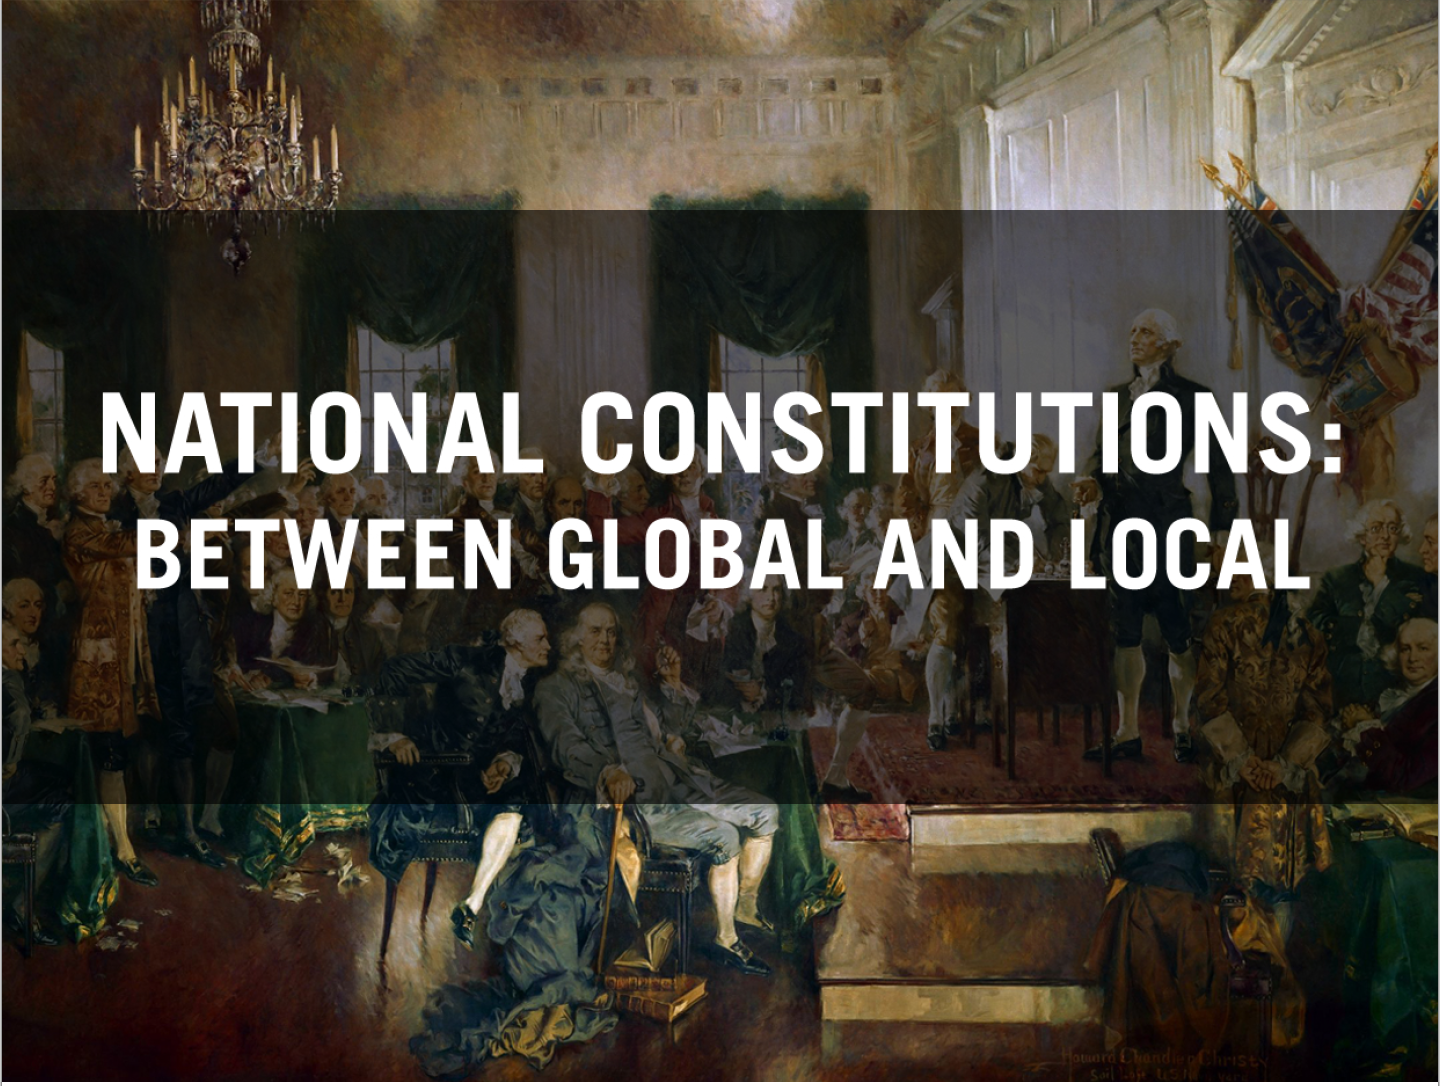 National Constitutions: Between Global and Local